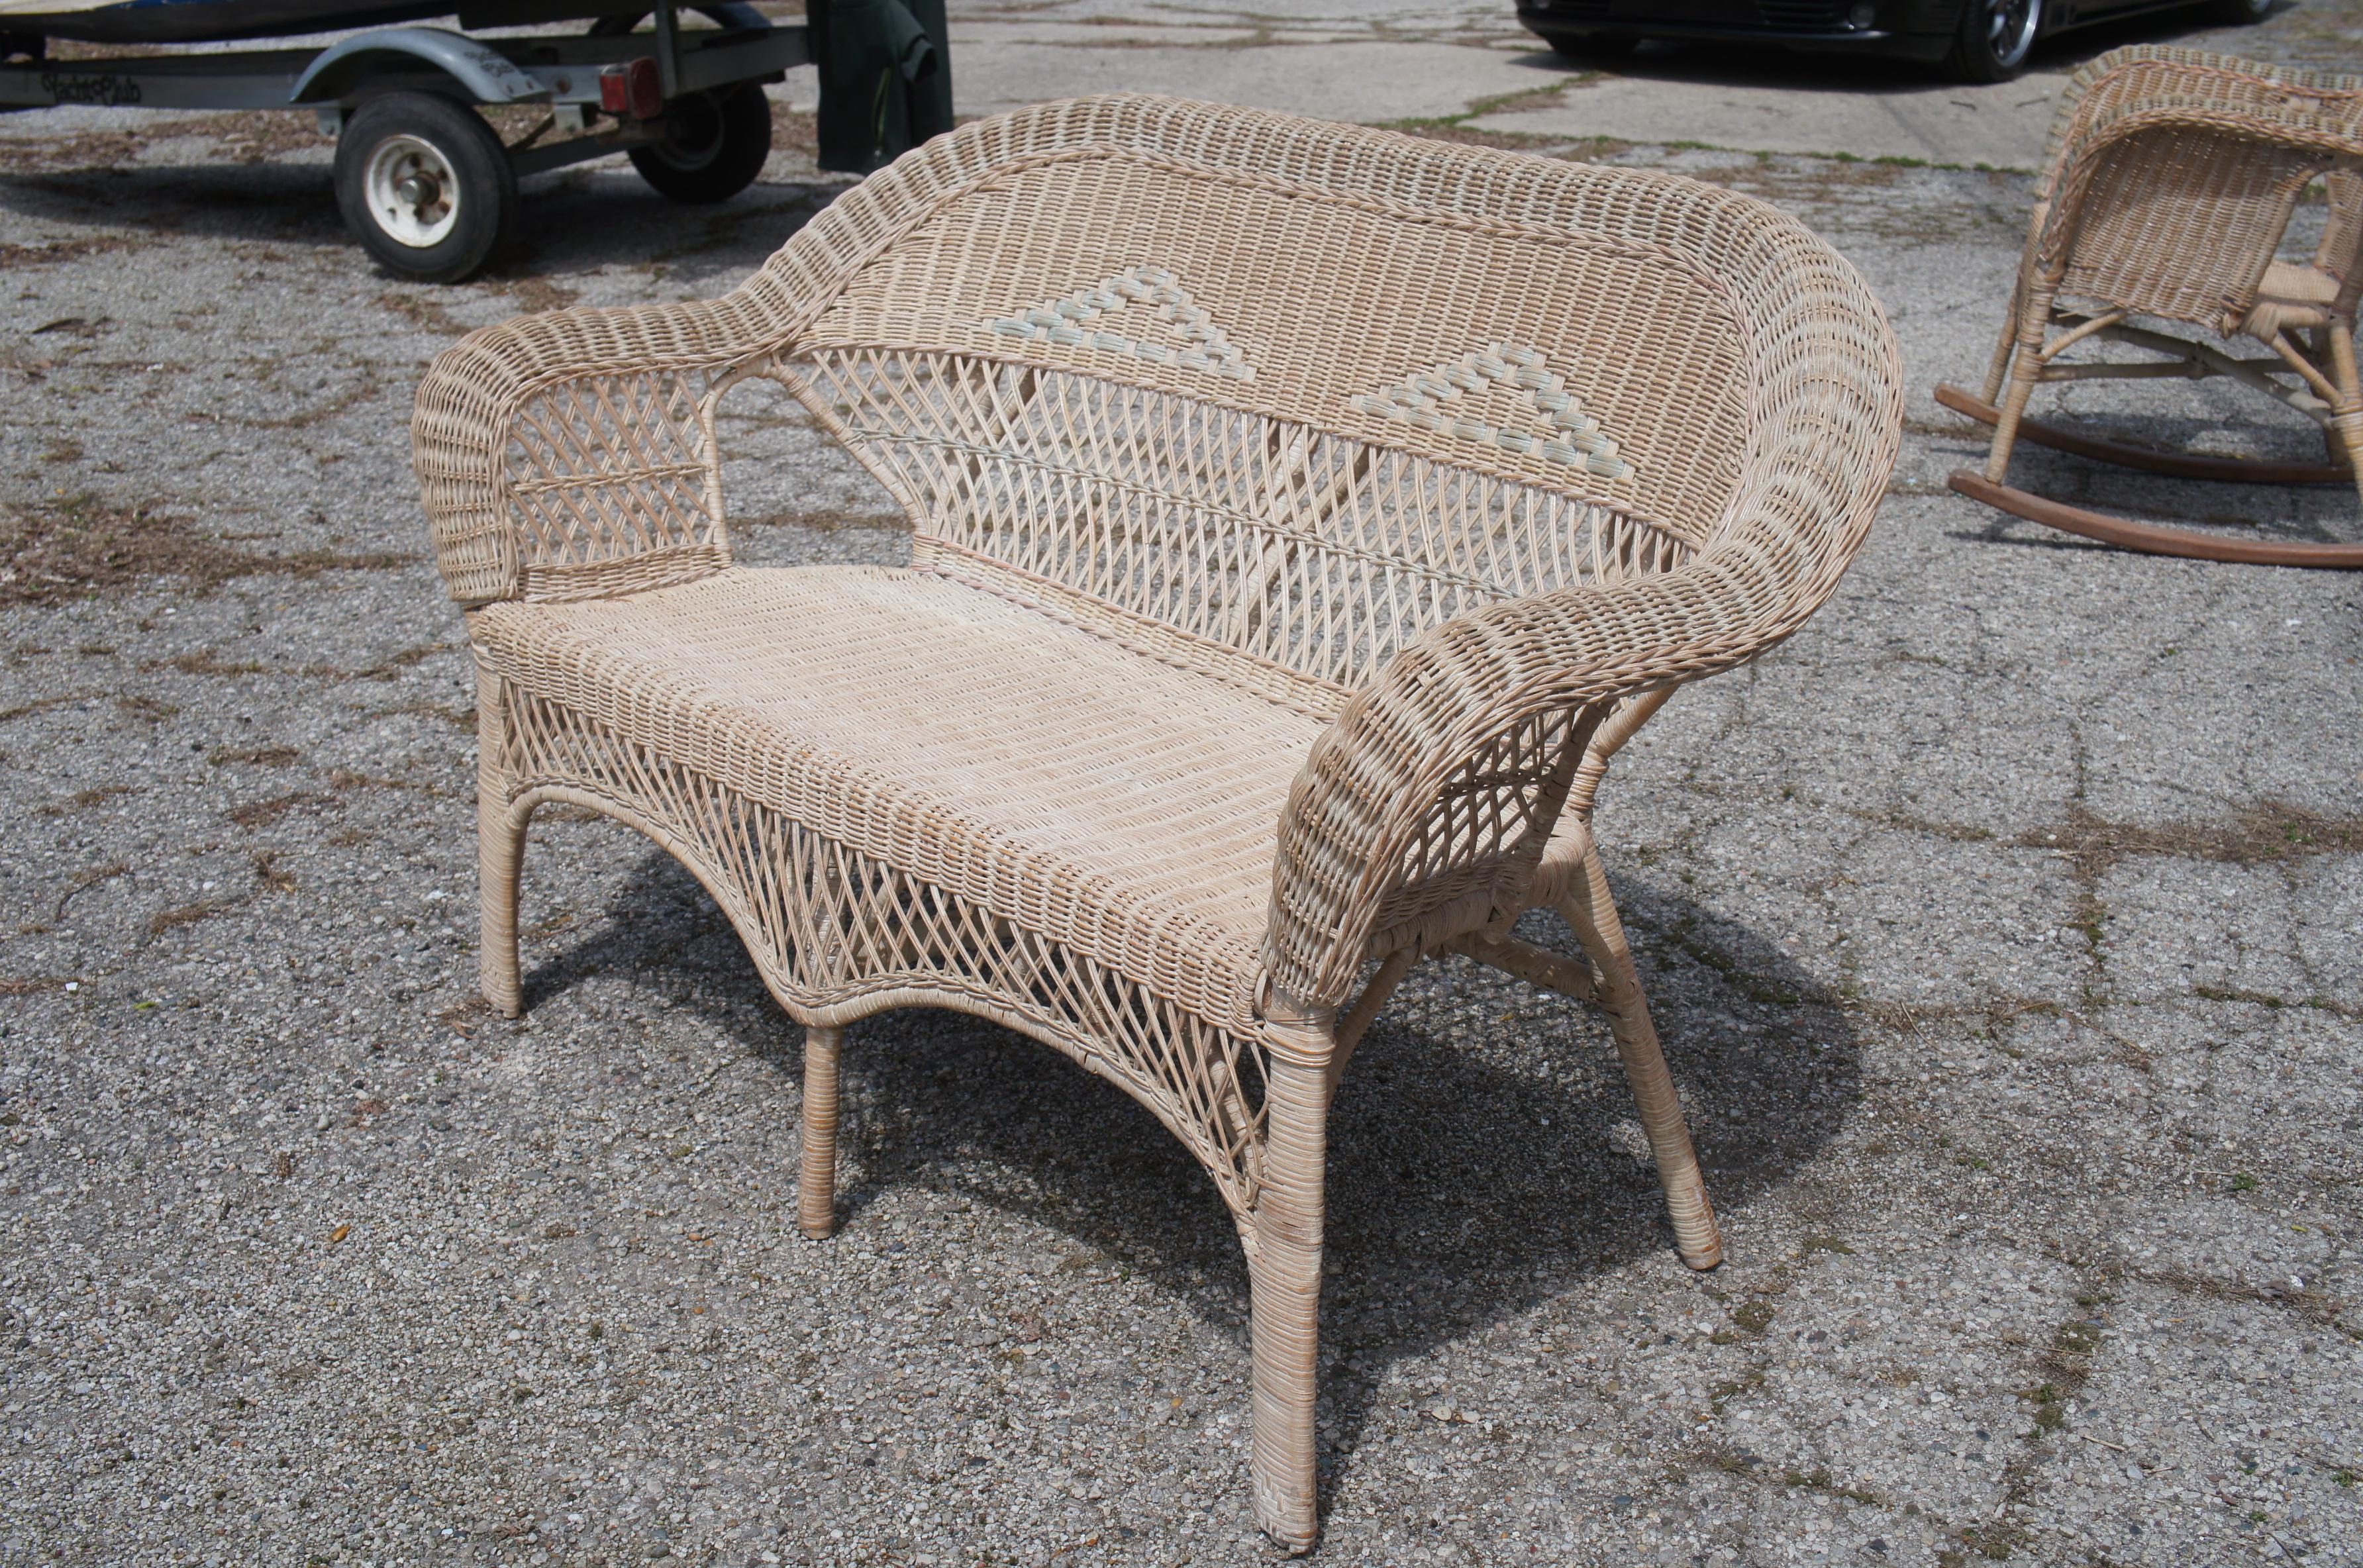 Antique Wicker Camelback Rocking Chair and Settee Loveseat Bench Rocker 1